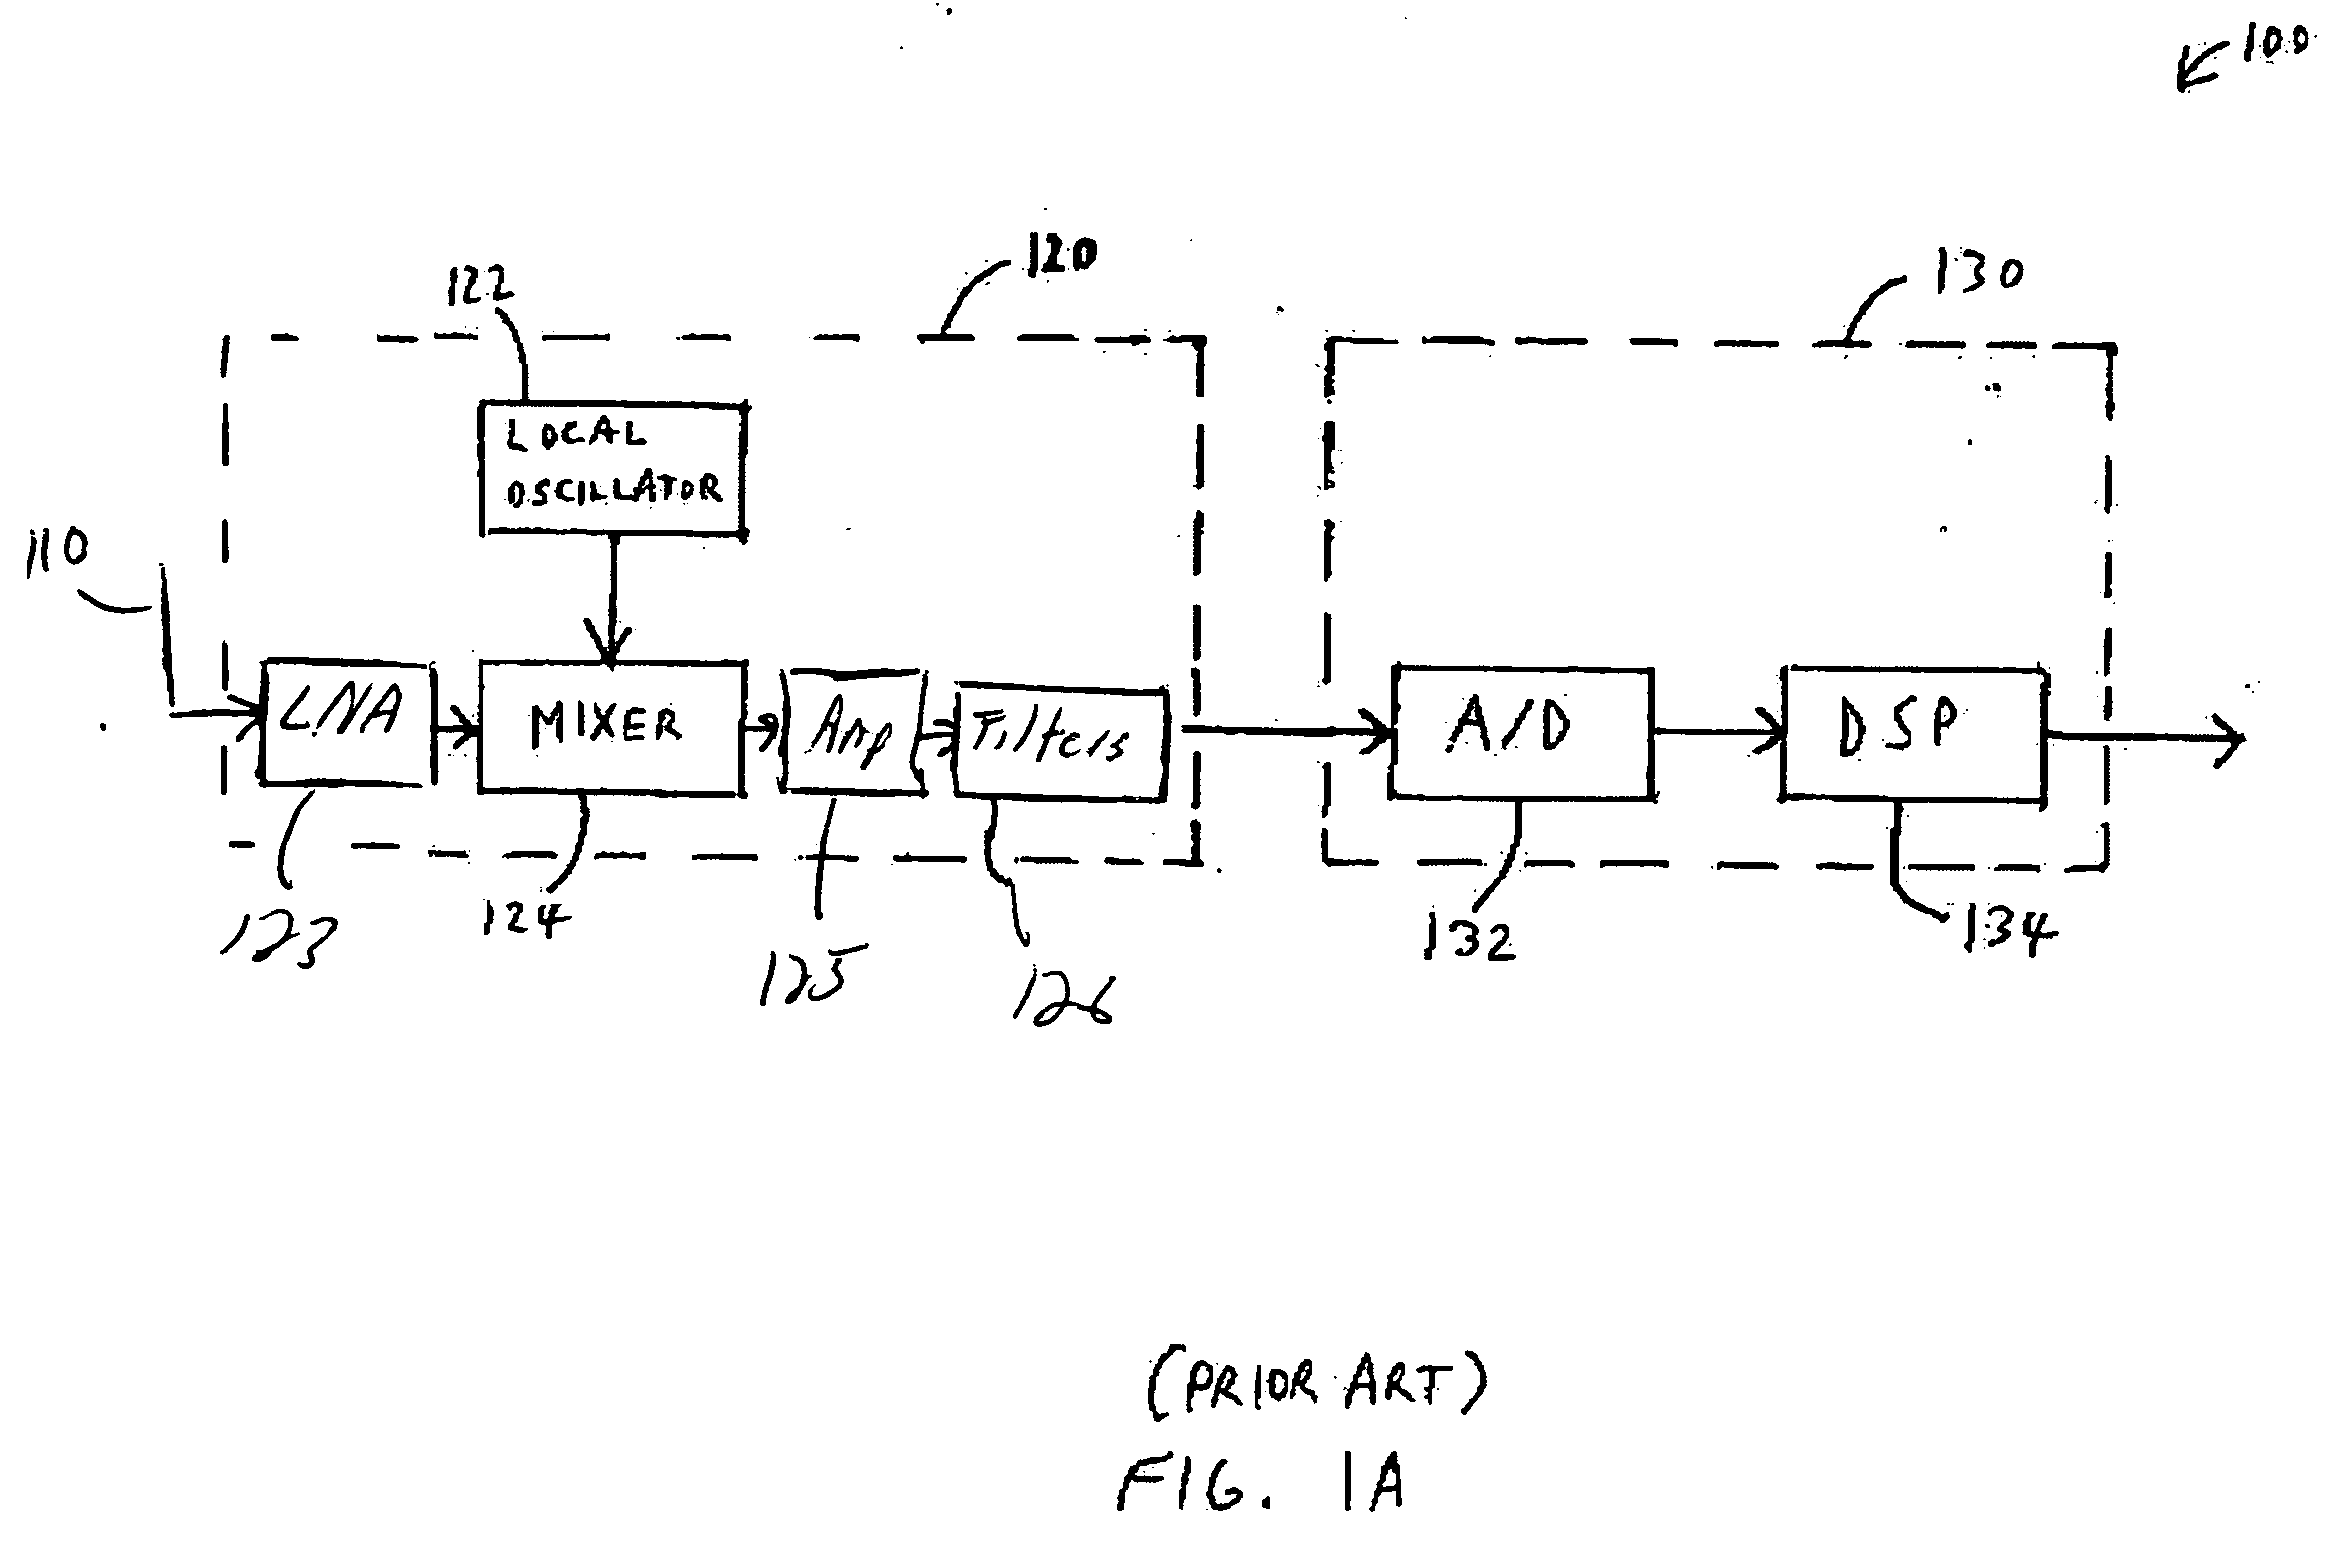 Apparatus and method of multiple antenna receiver combining of high data rate wideband packetized wireless communication signals